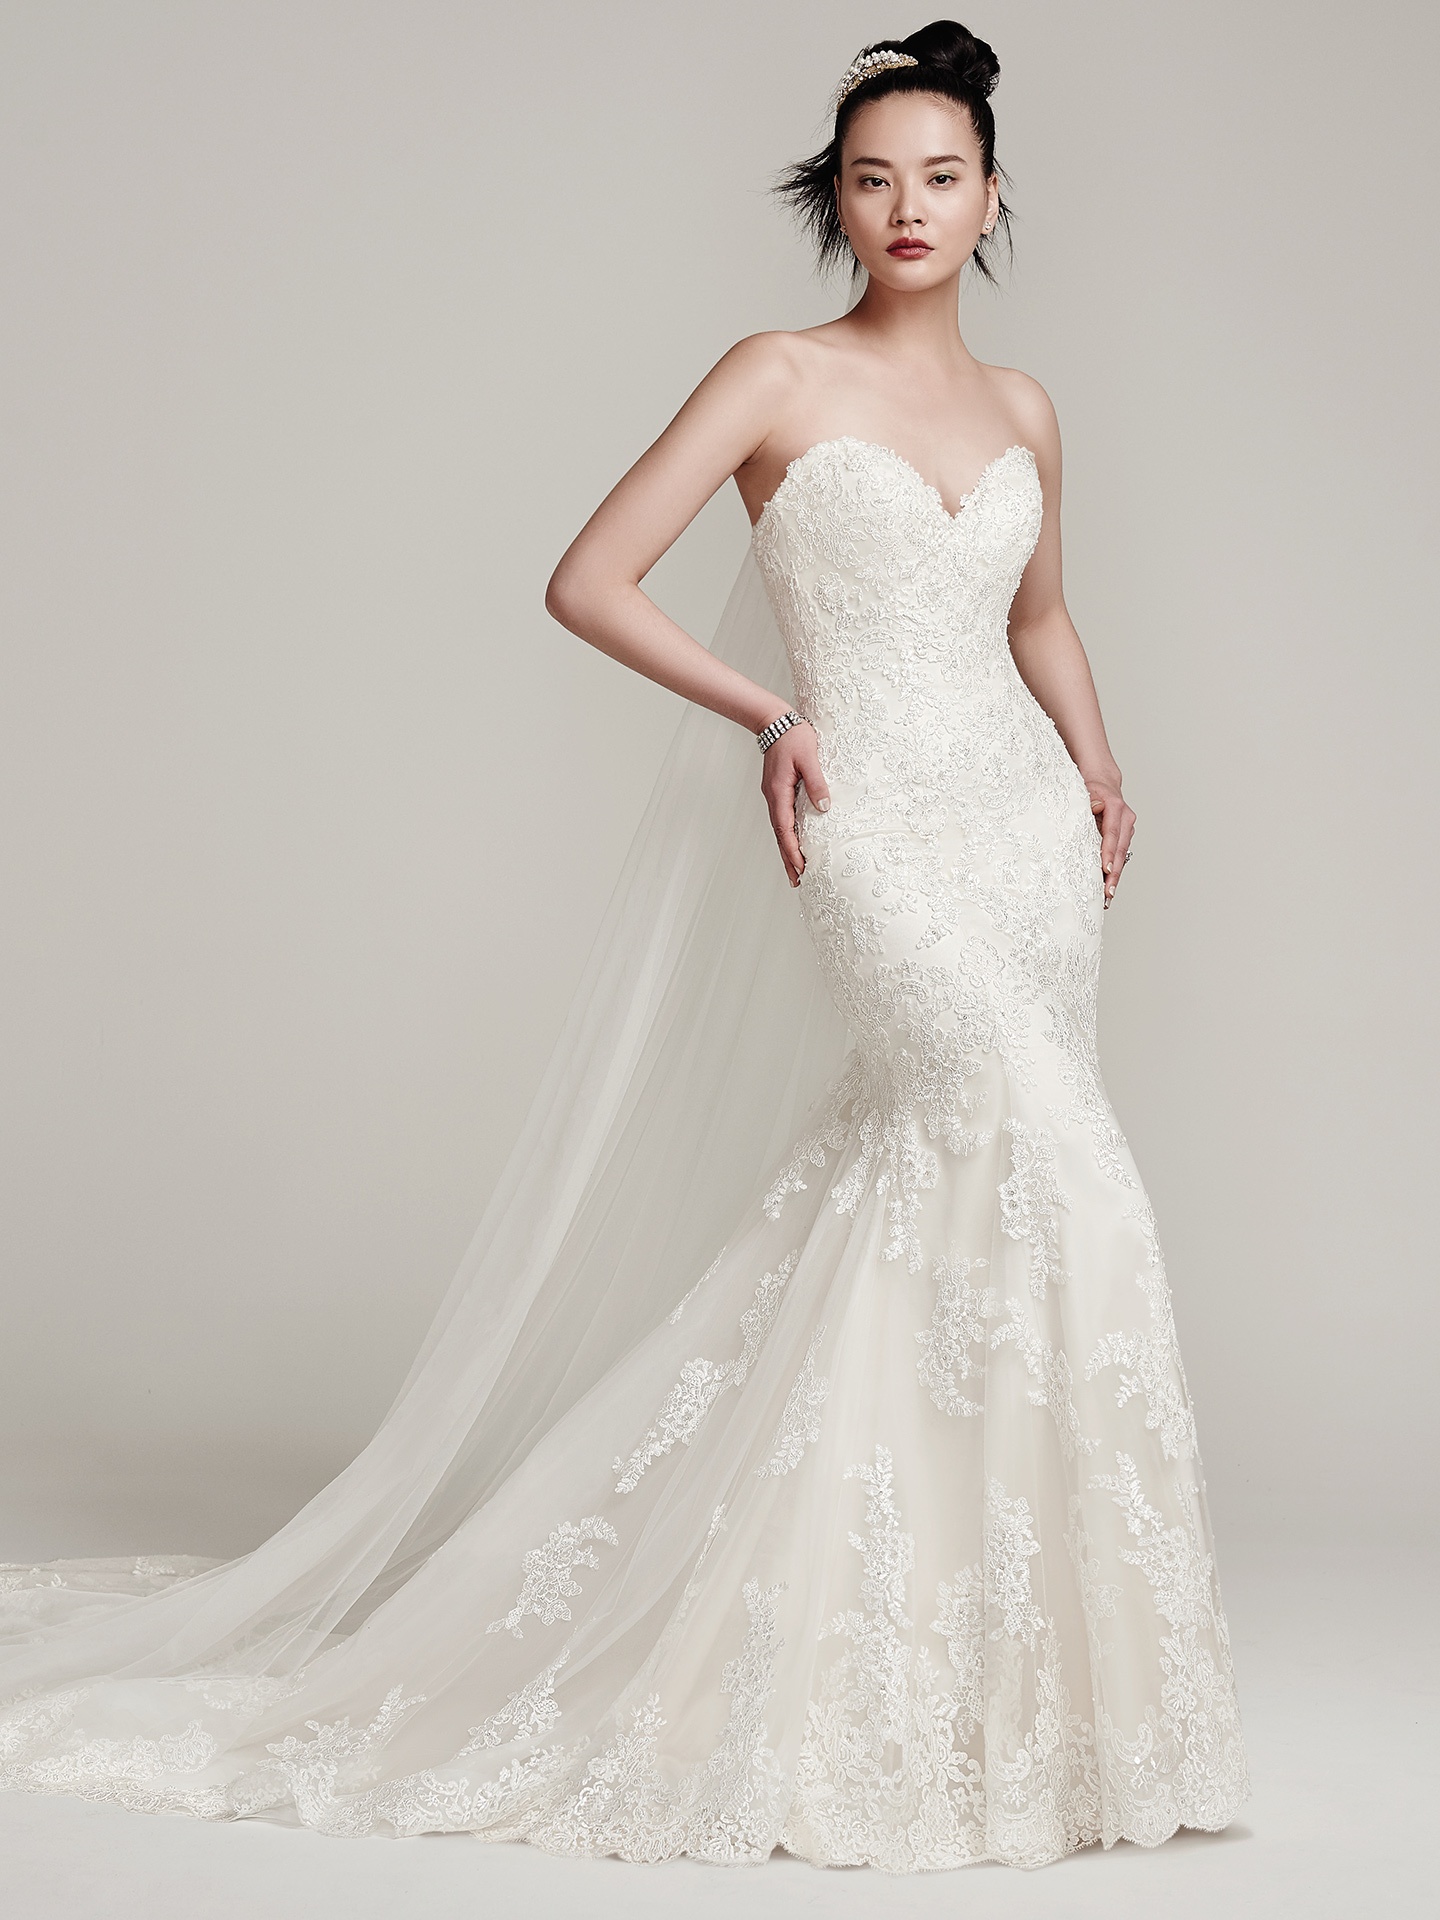 Fit And Flare Wedding Gown Sottero And Midgley Maggie Sottero